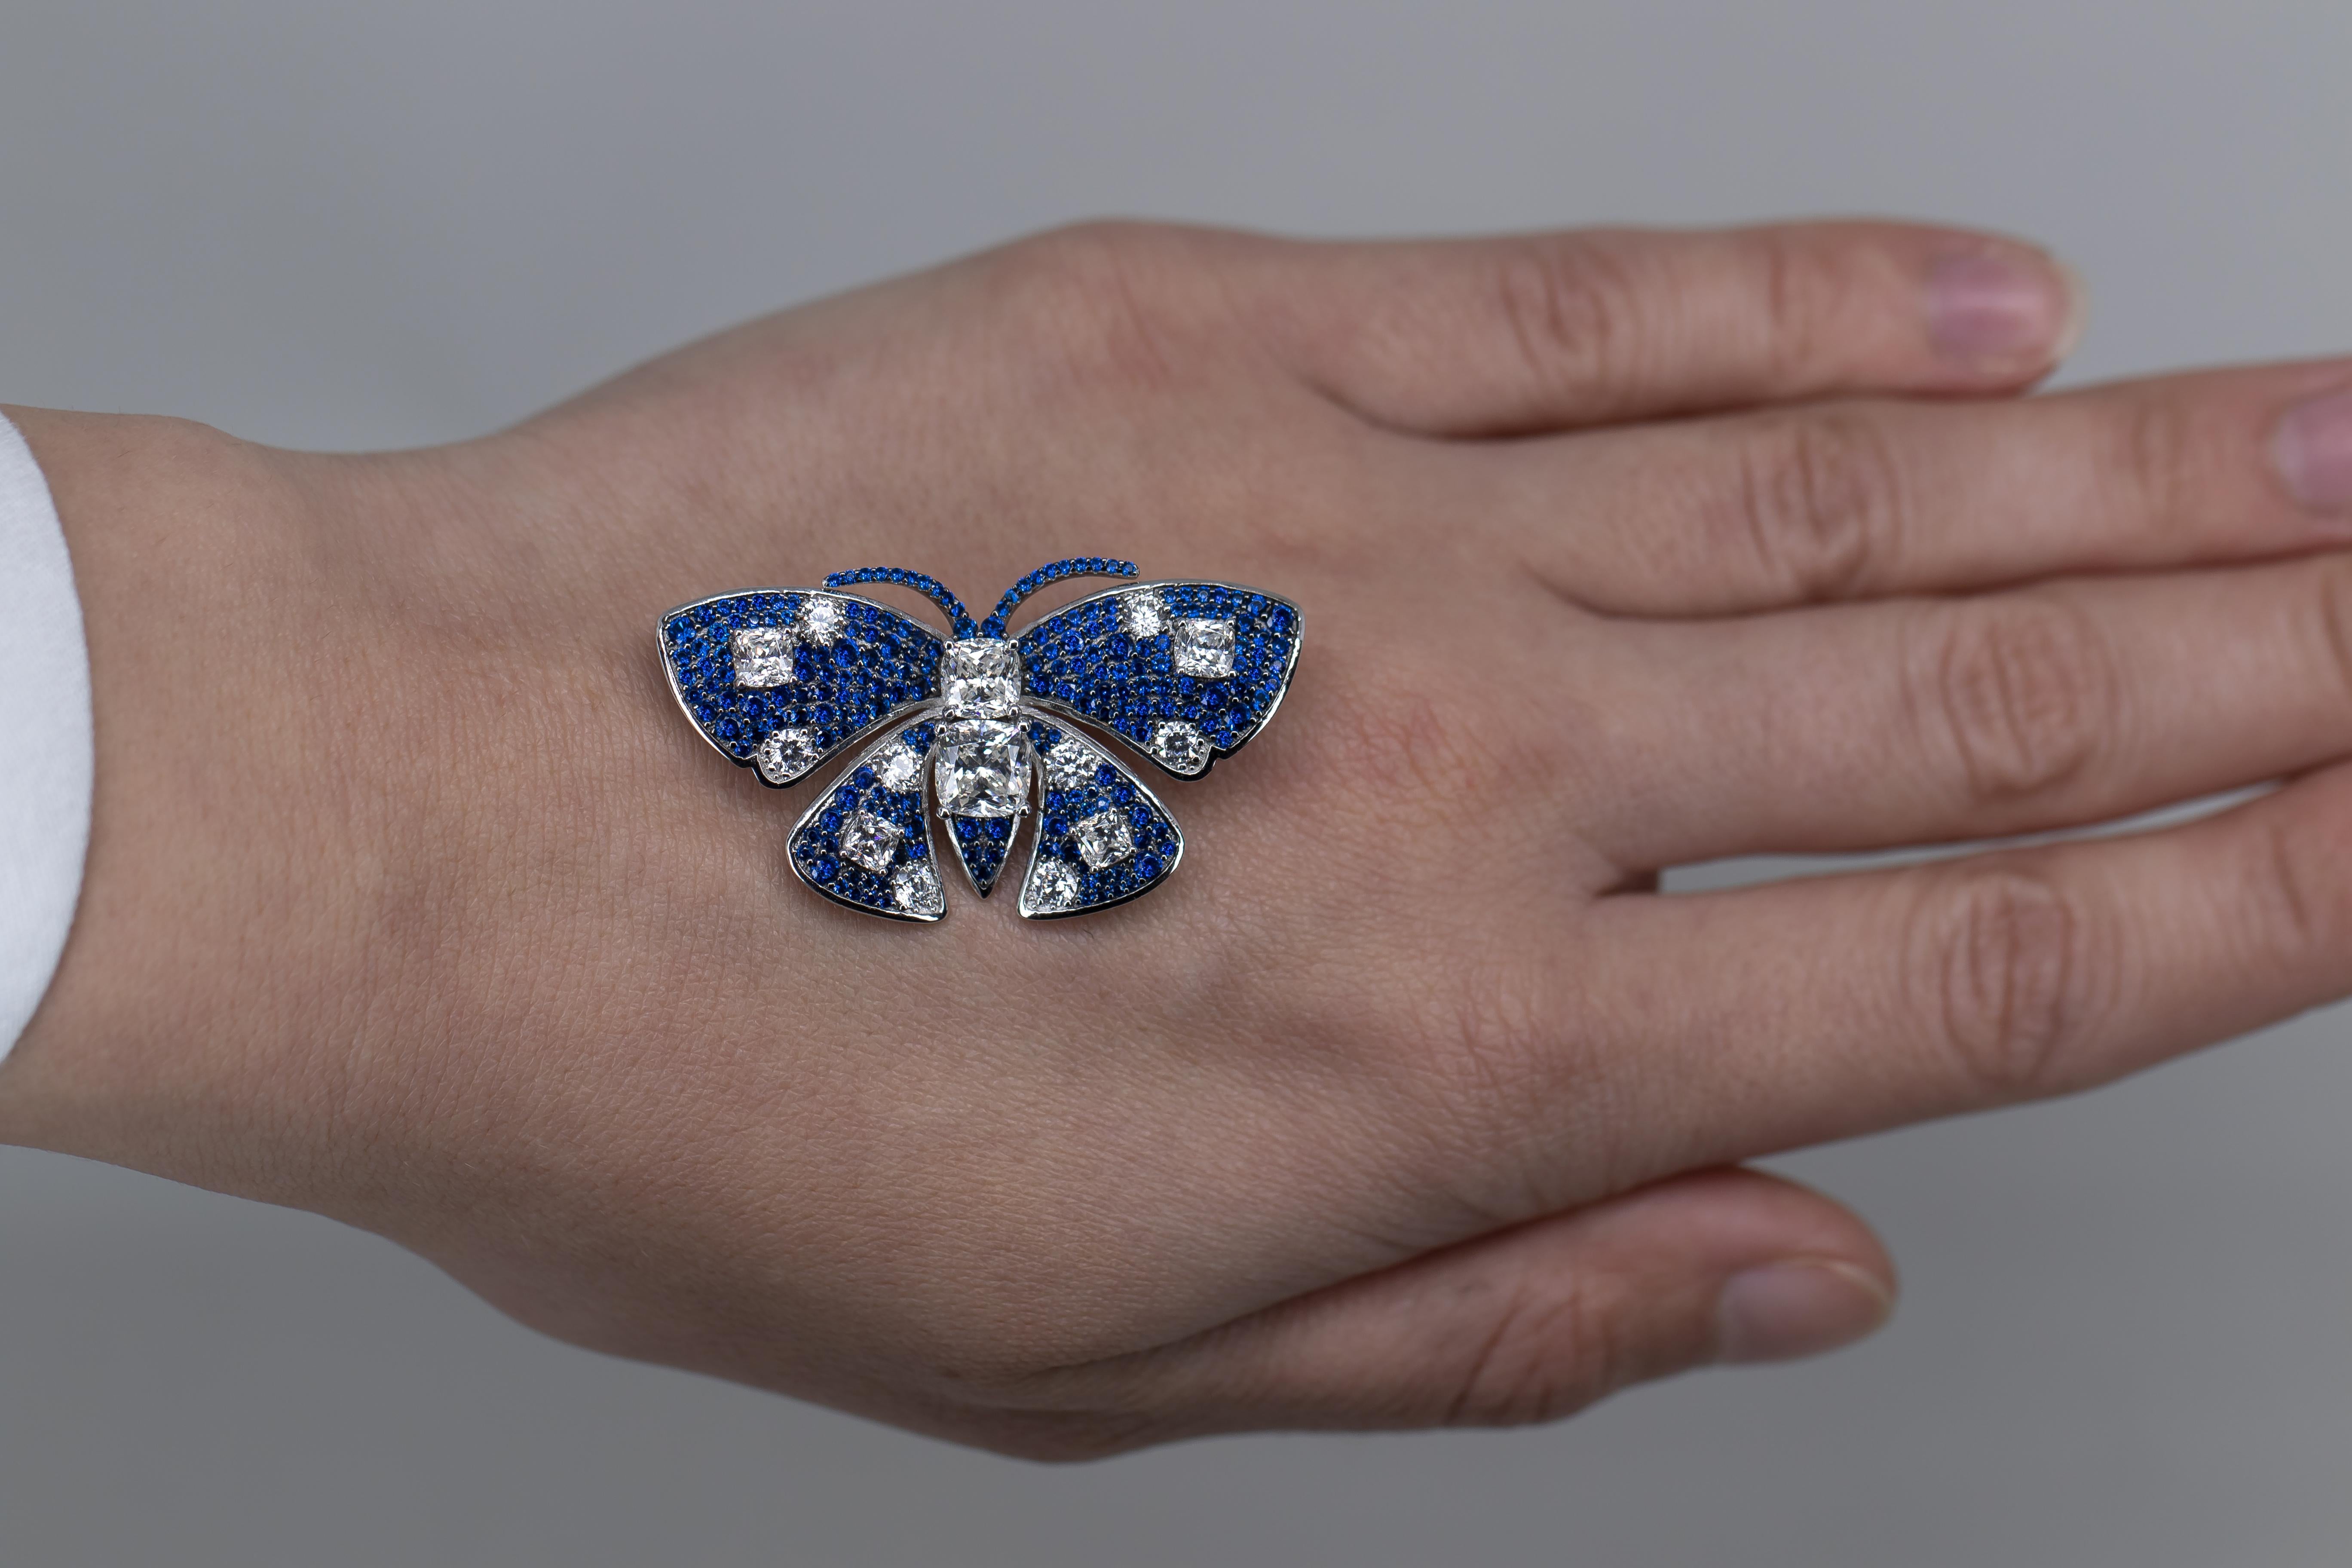 Hand Made Butterfly Brooch
Gemstone: AAA Grade Cubic Zirconia
Metal: Rhodium on Sterling Silver
Style: French